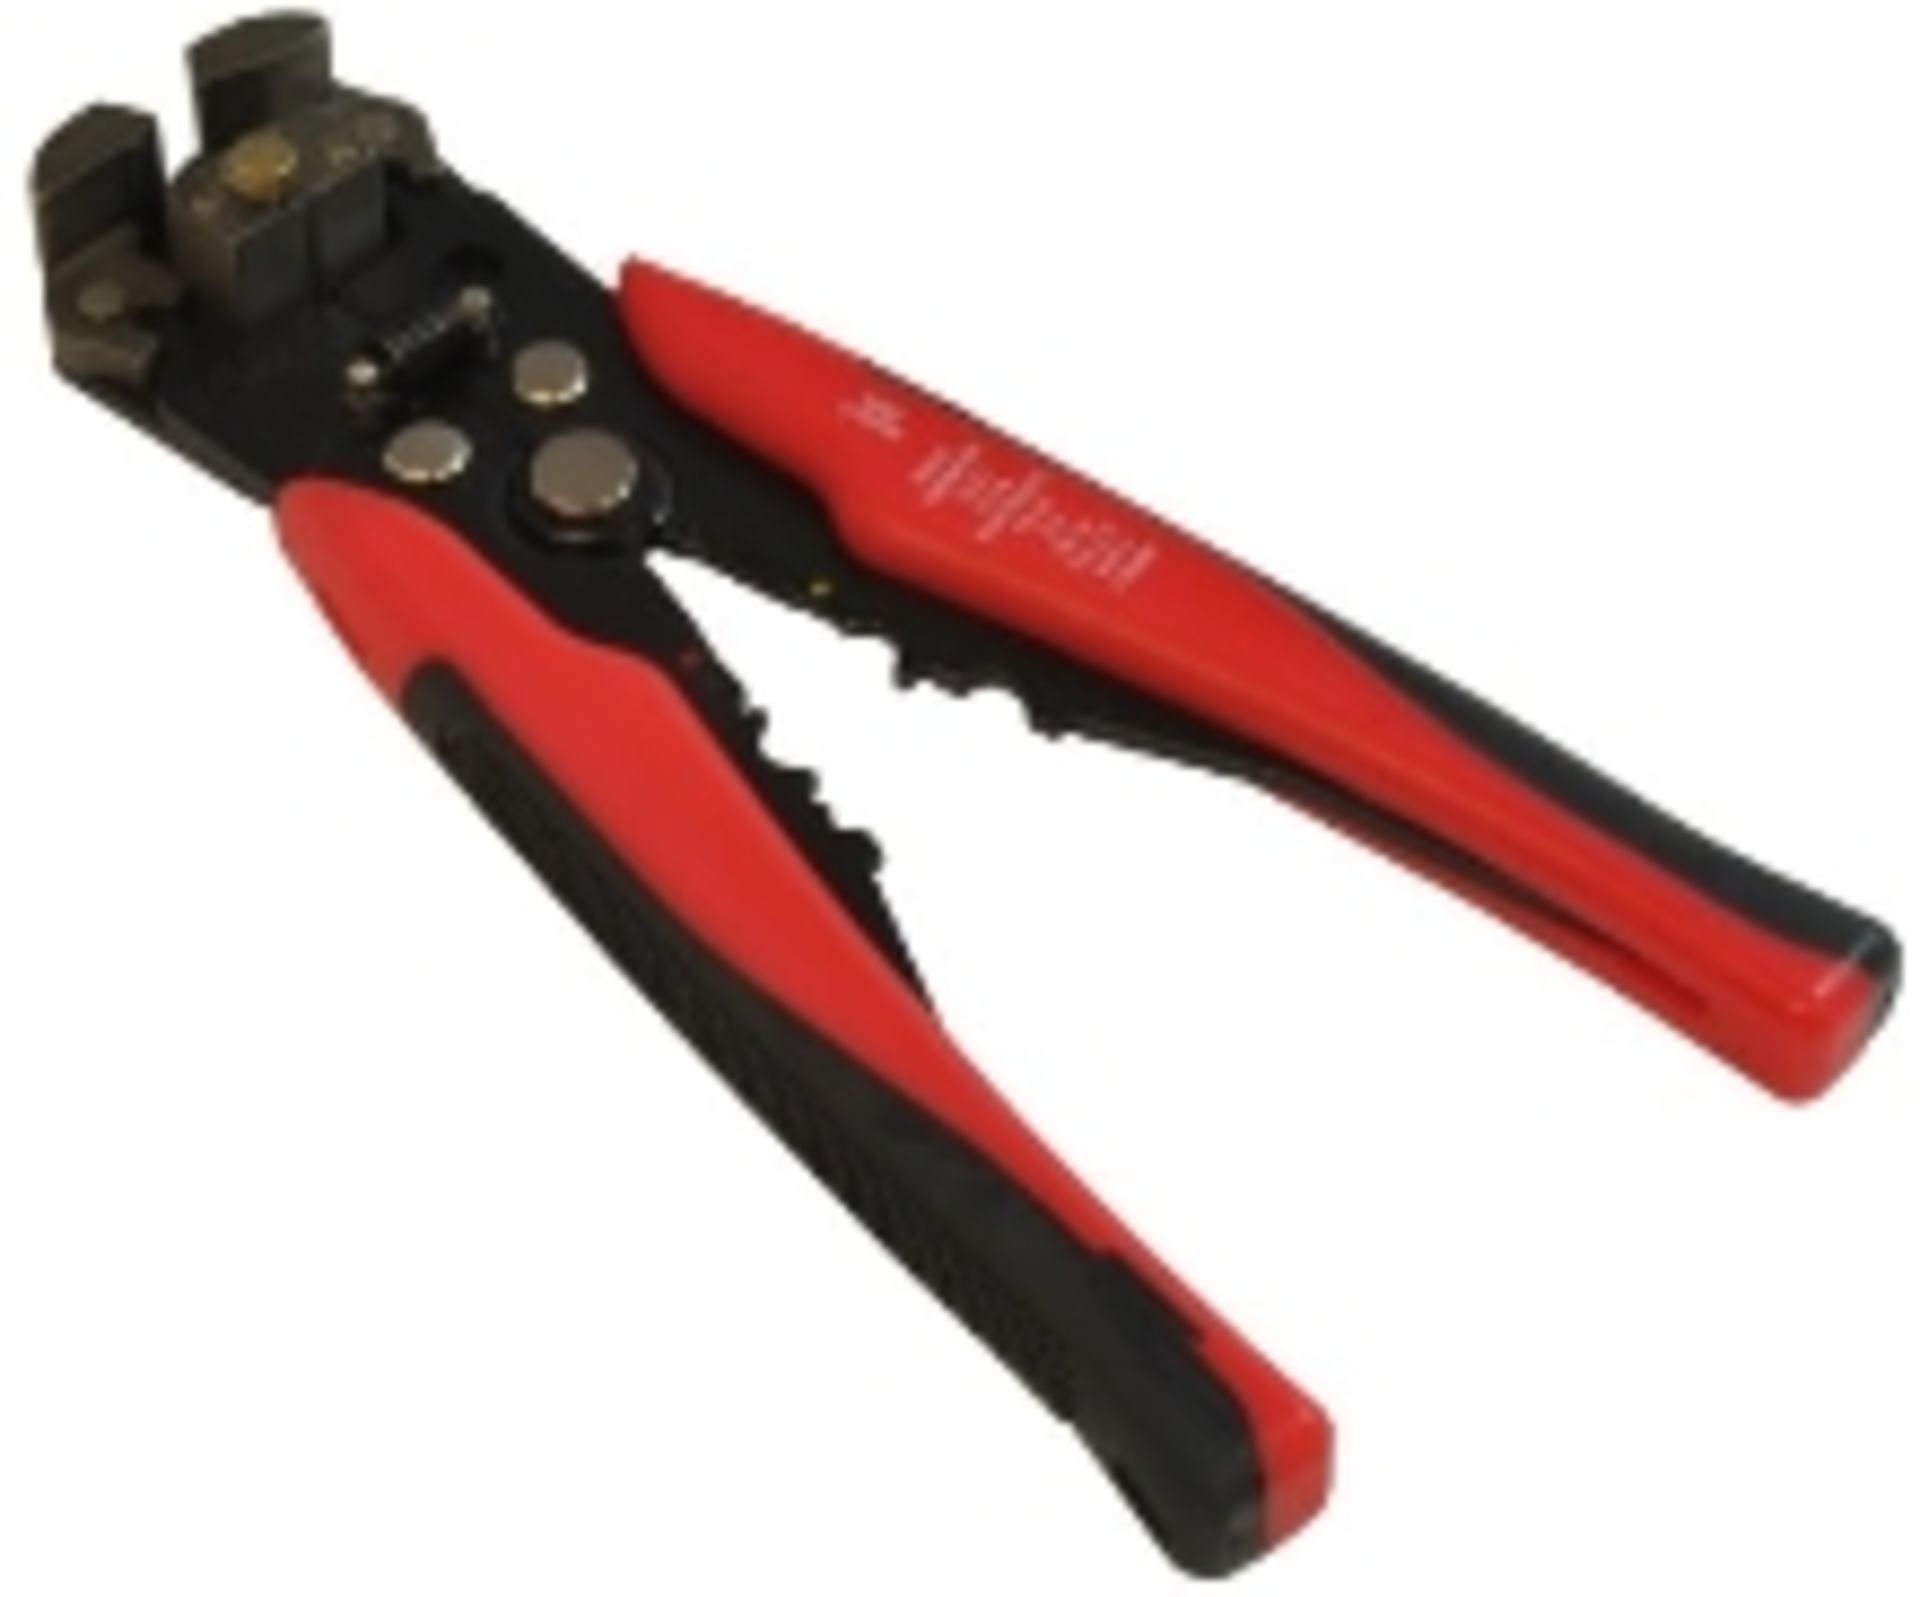 V Brand New Amtech Auto Wire Stripper X 2 YOUR BID PRICE TO BE MULTIPLIED BY TWO